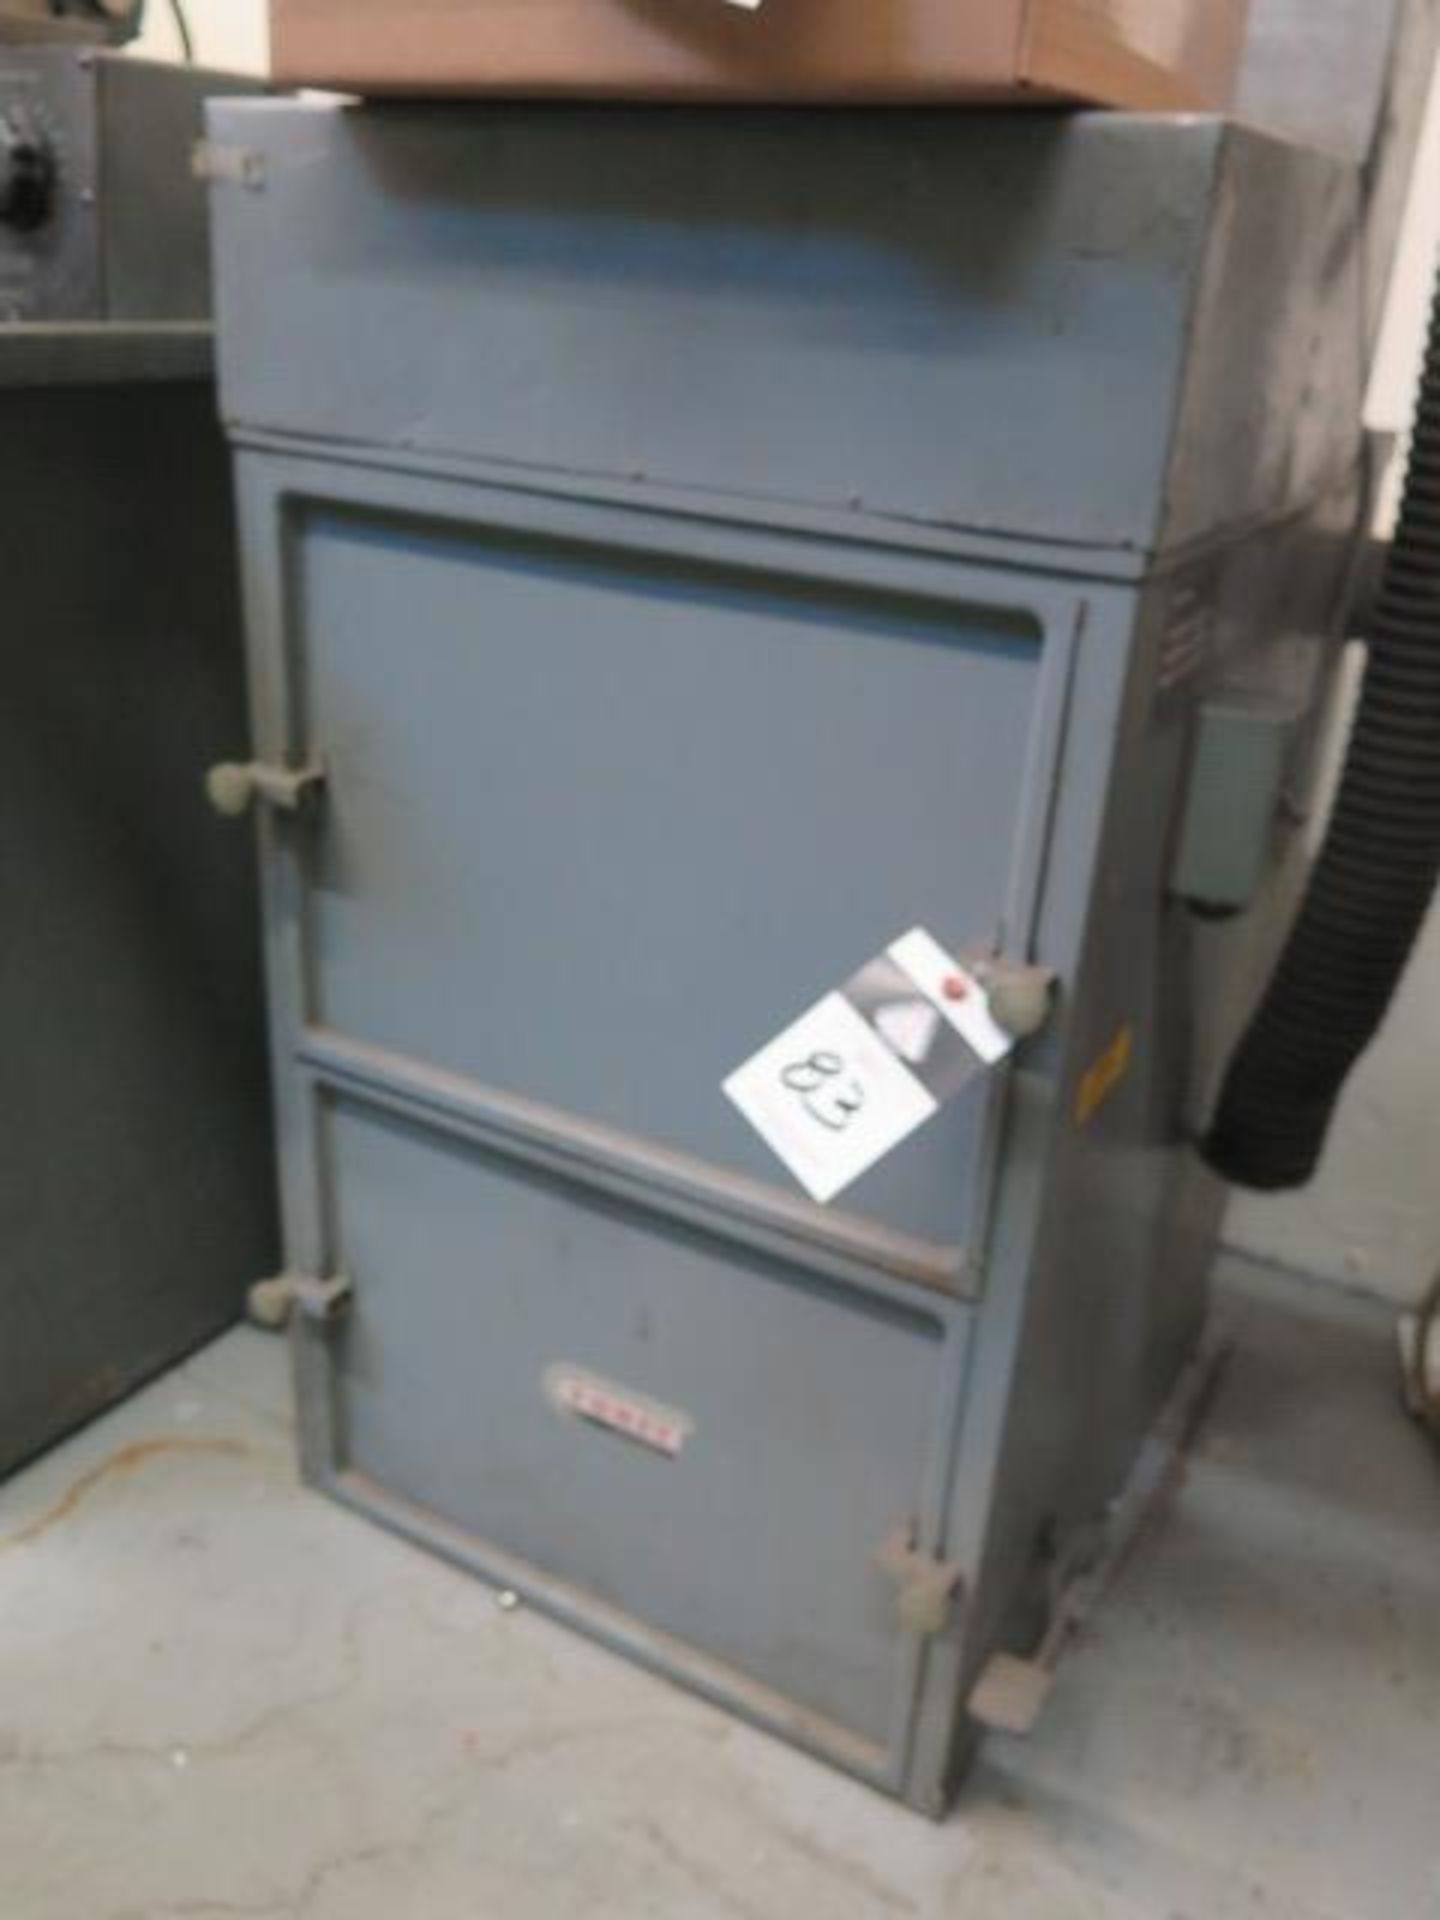 Torit mdl. 64 Dust Collector s/n F1694 (SOLD AS-IS - NO WARRANTY)